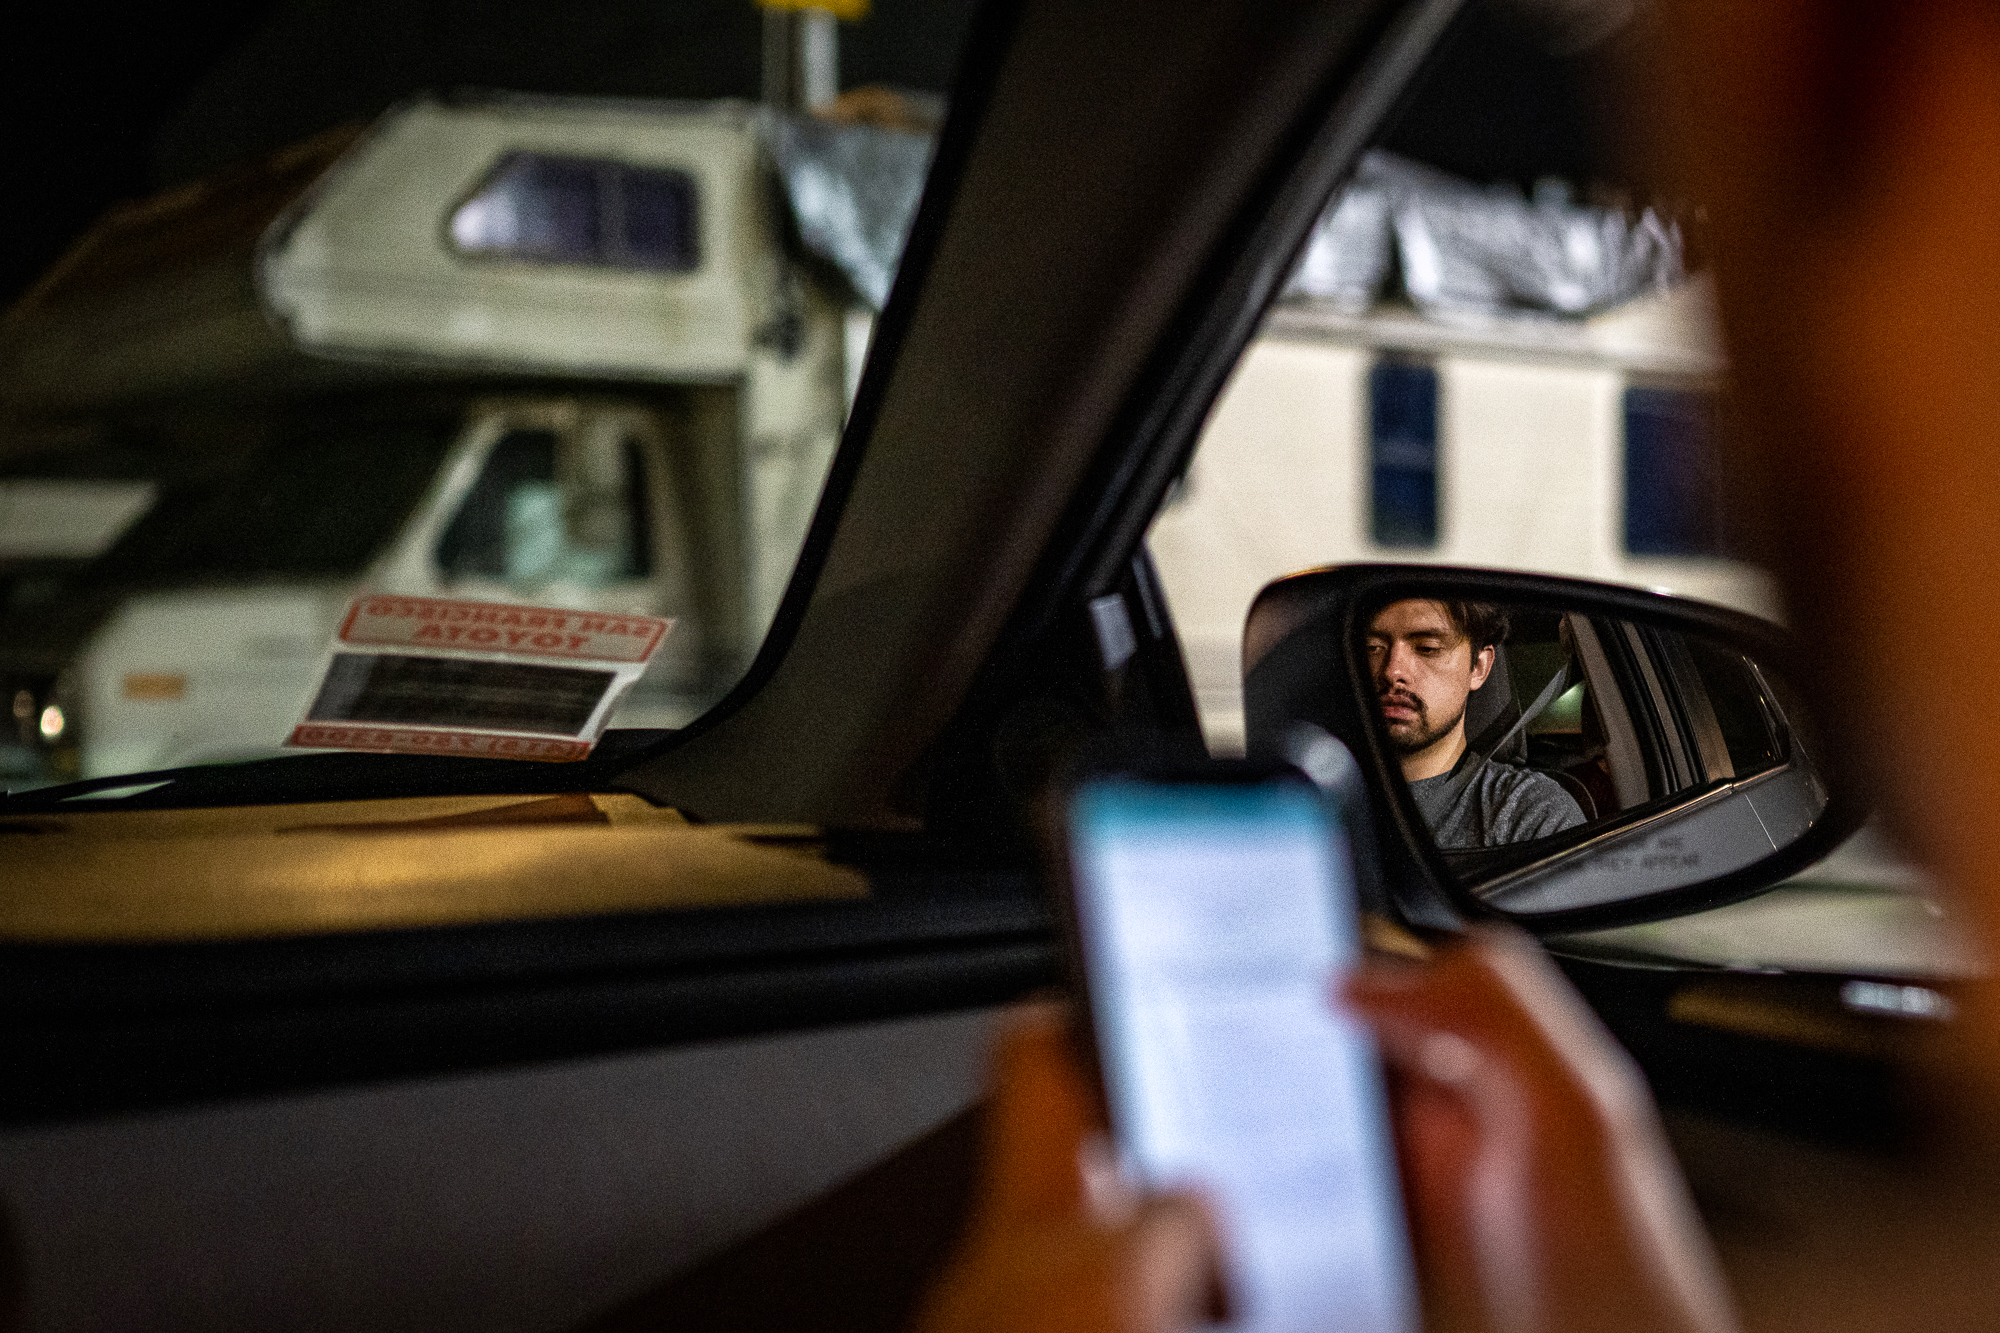 A man inputs data into a phone, while sitting in the passenger seat of a car